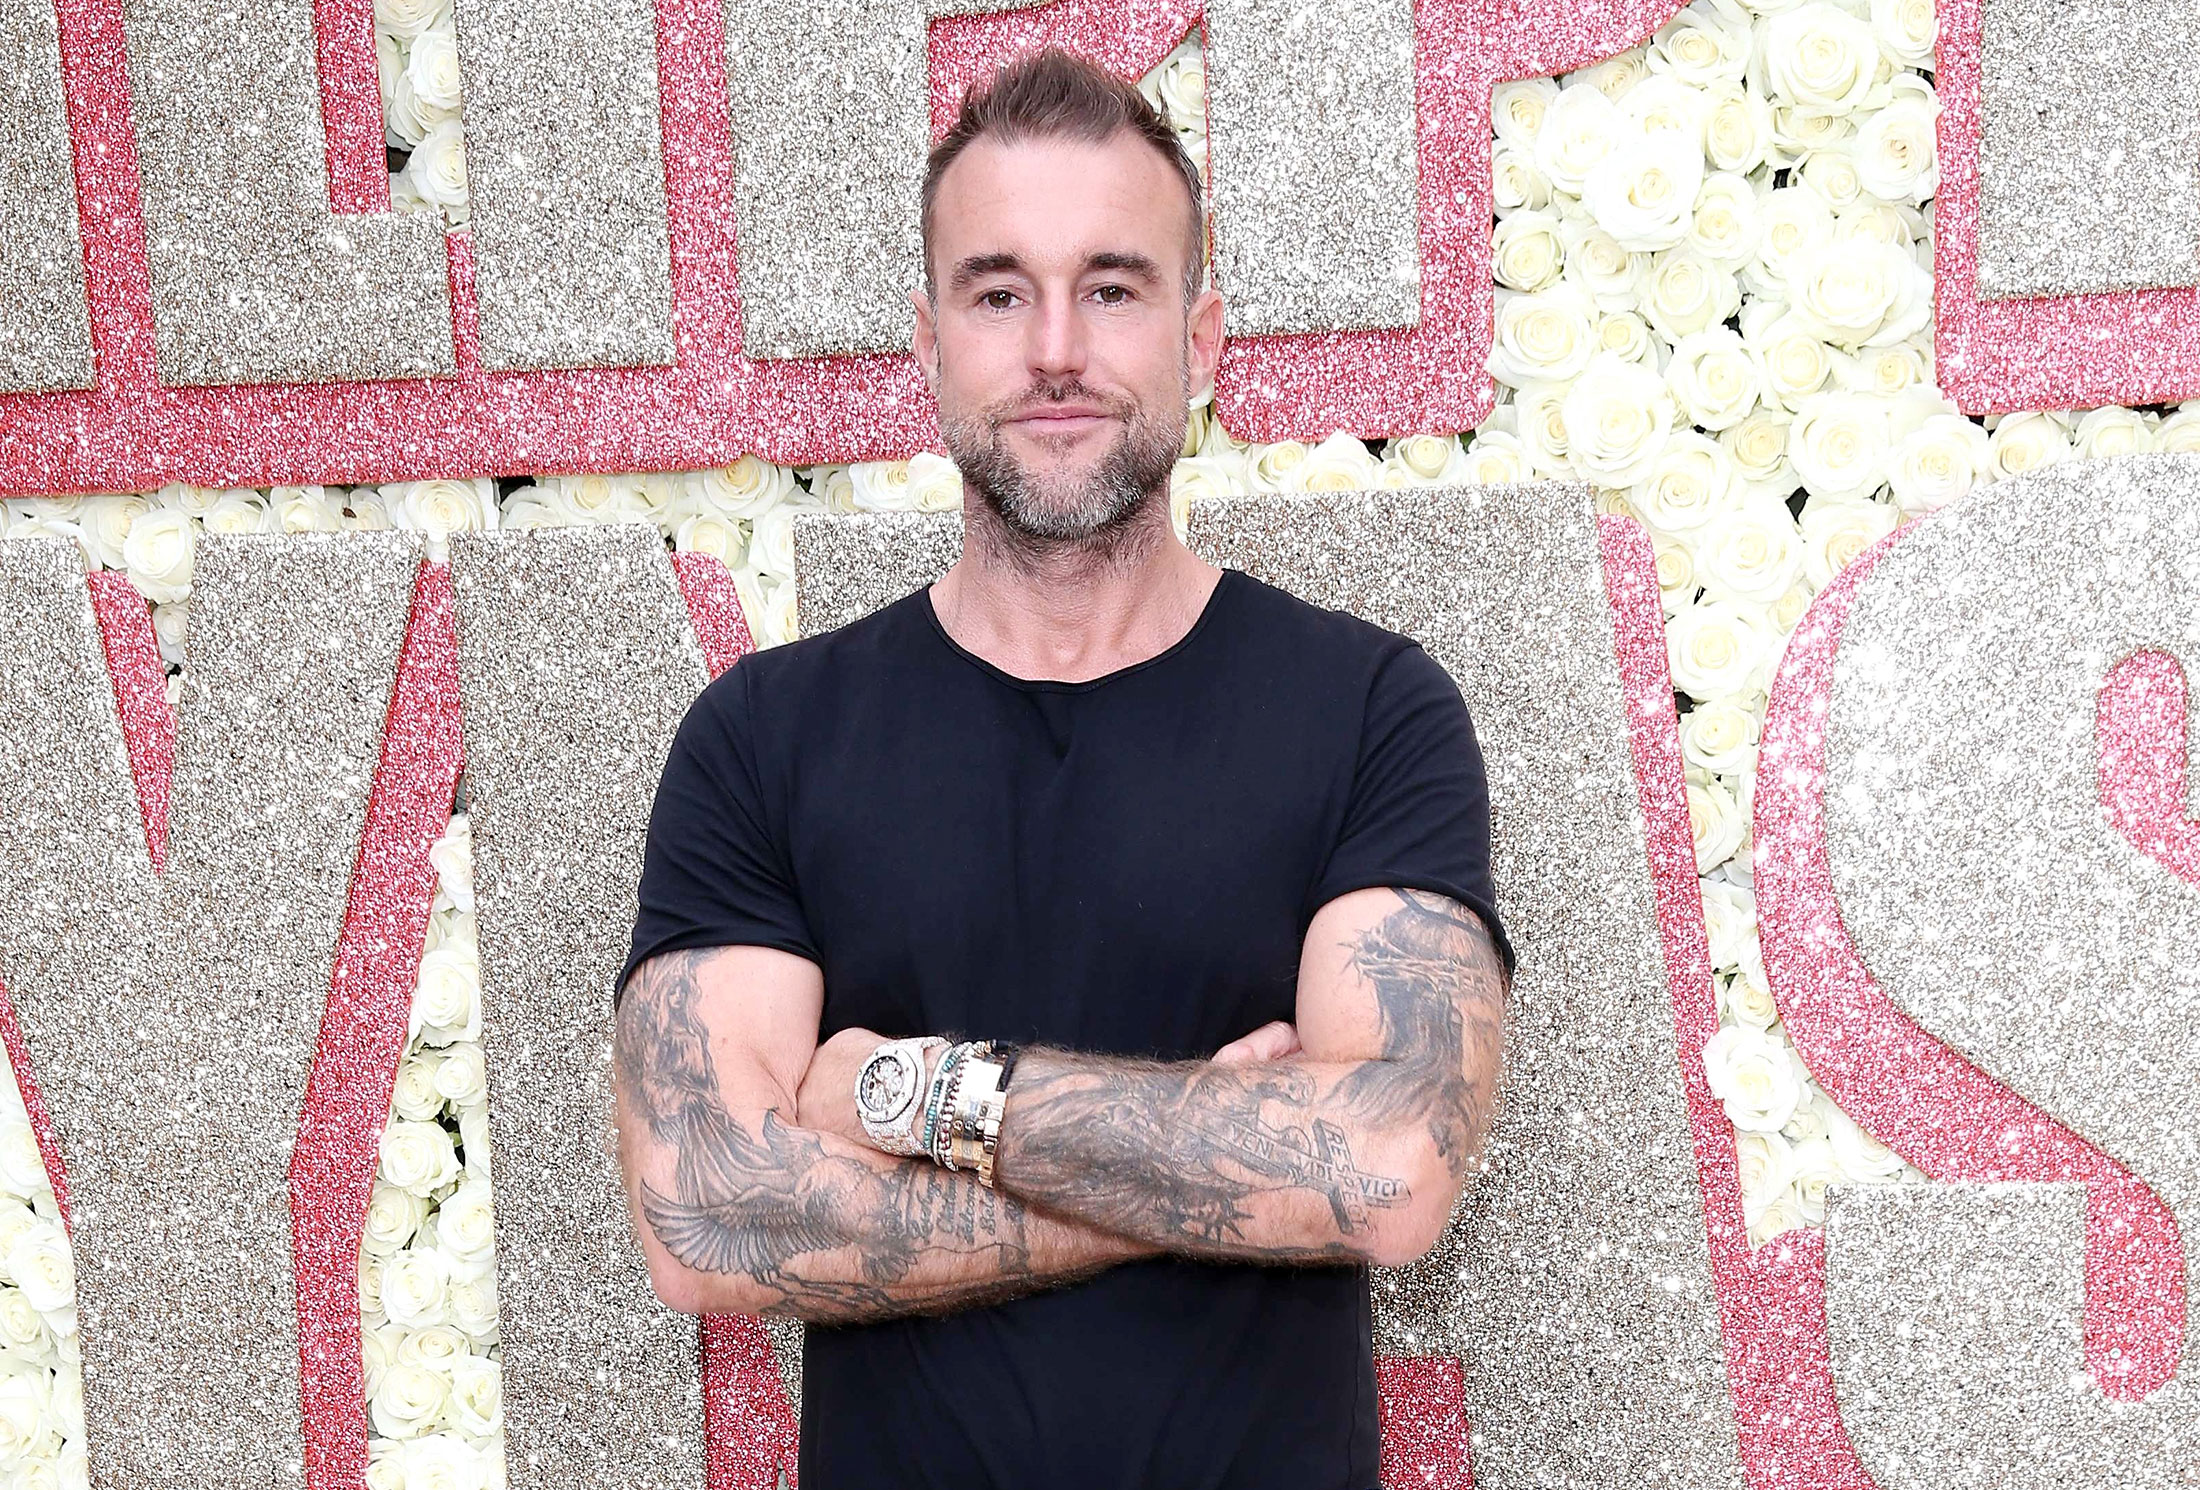 Philipp Plein Accused of Workplace Homophobia in Discrimination Suit